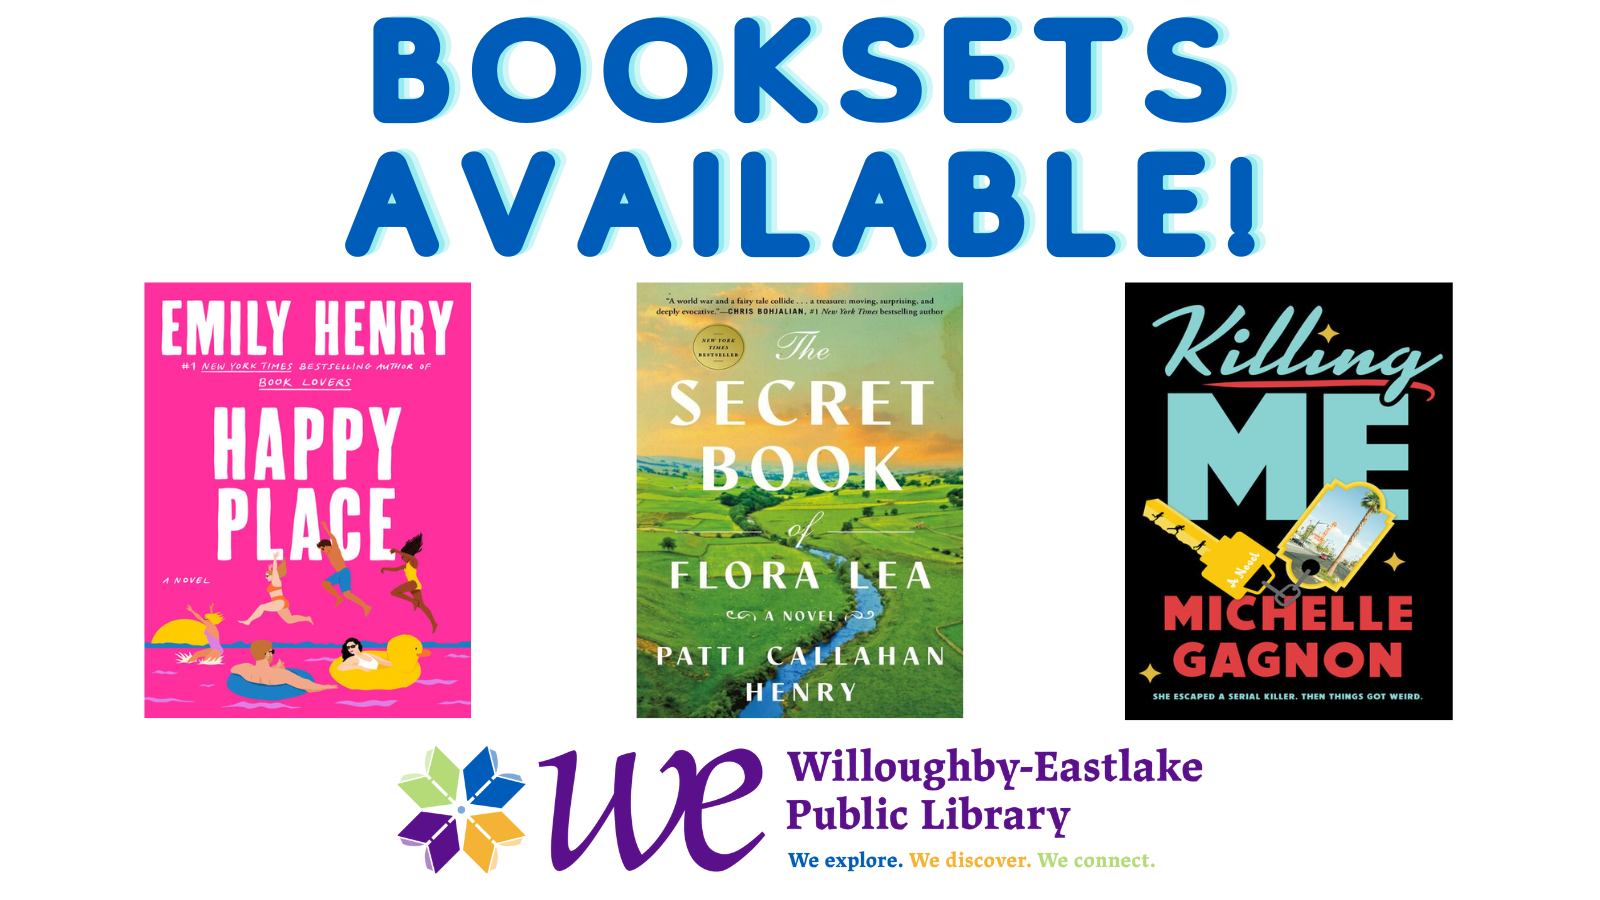 Booksets are Now Available for Your Book Club! - Willoughby